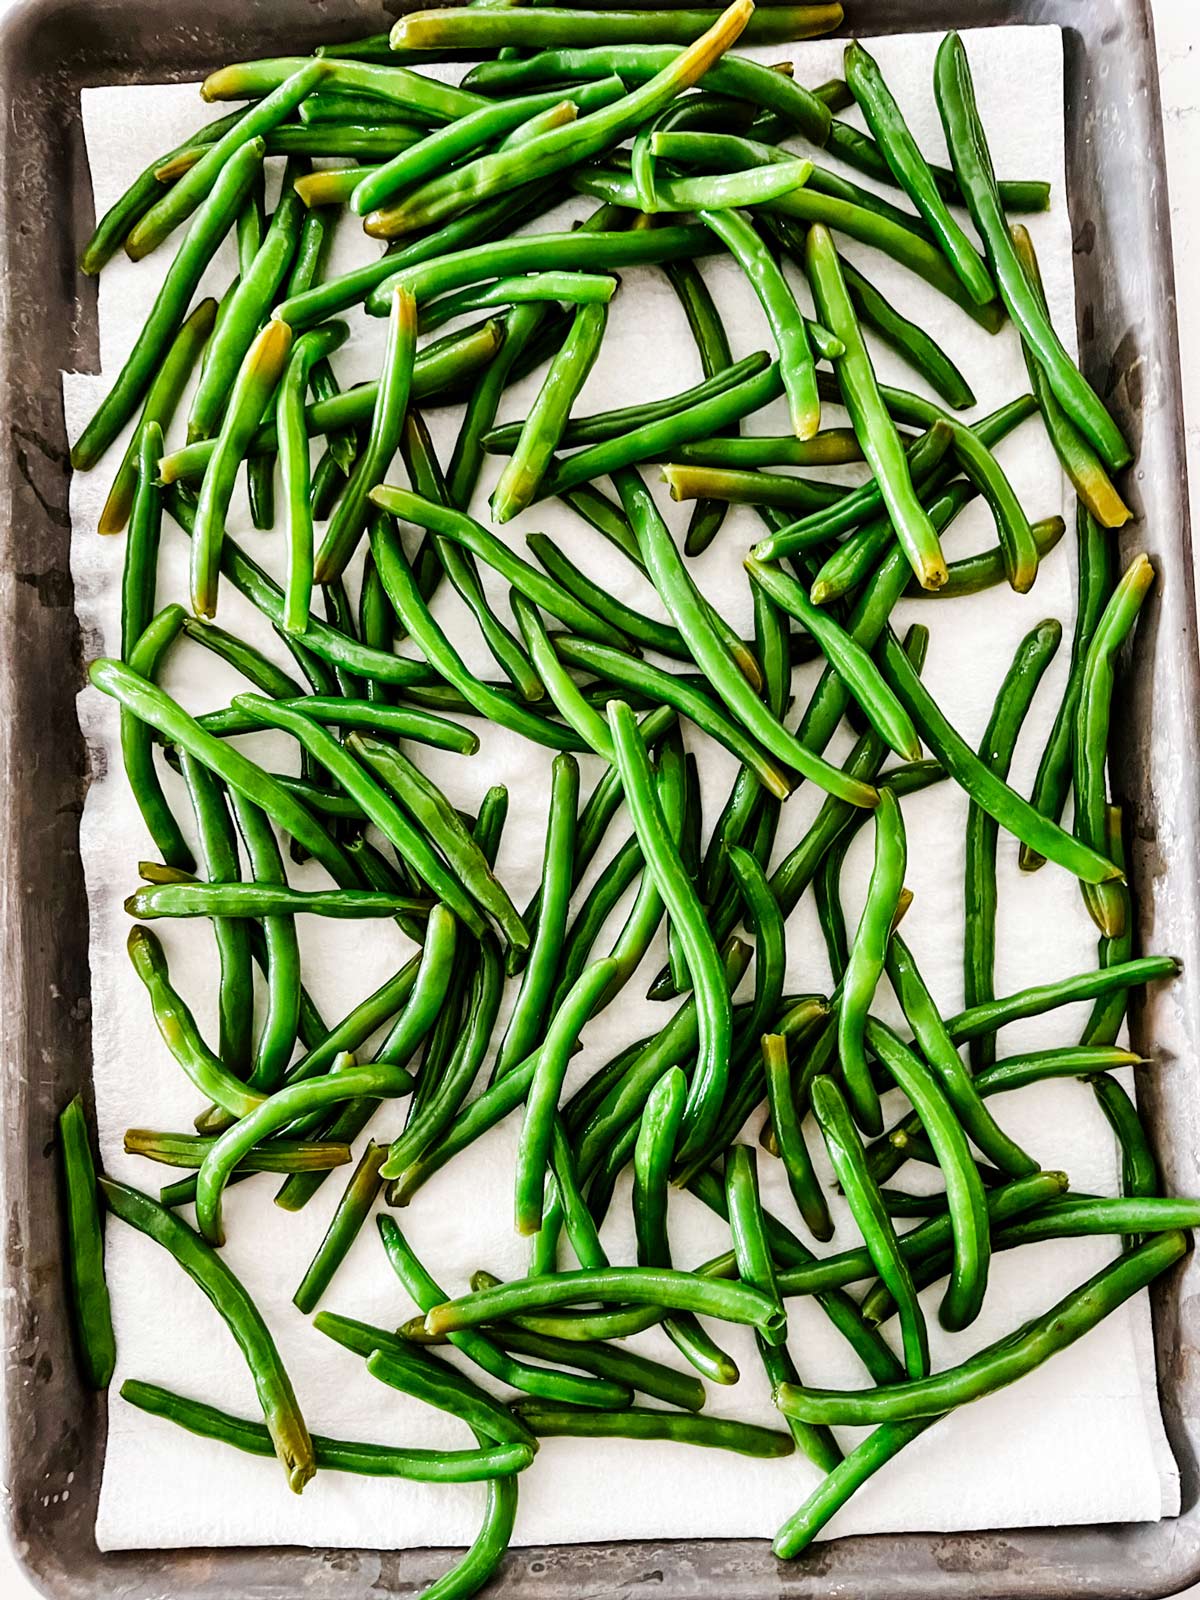 Green beans on a paper towel lined baking sheet.